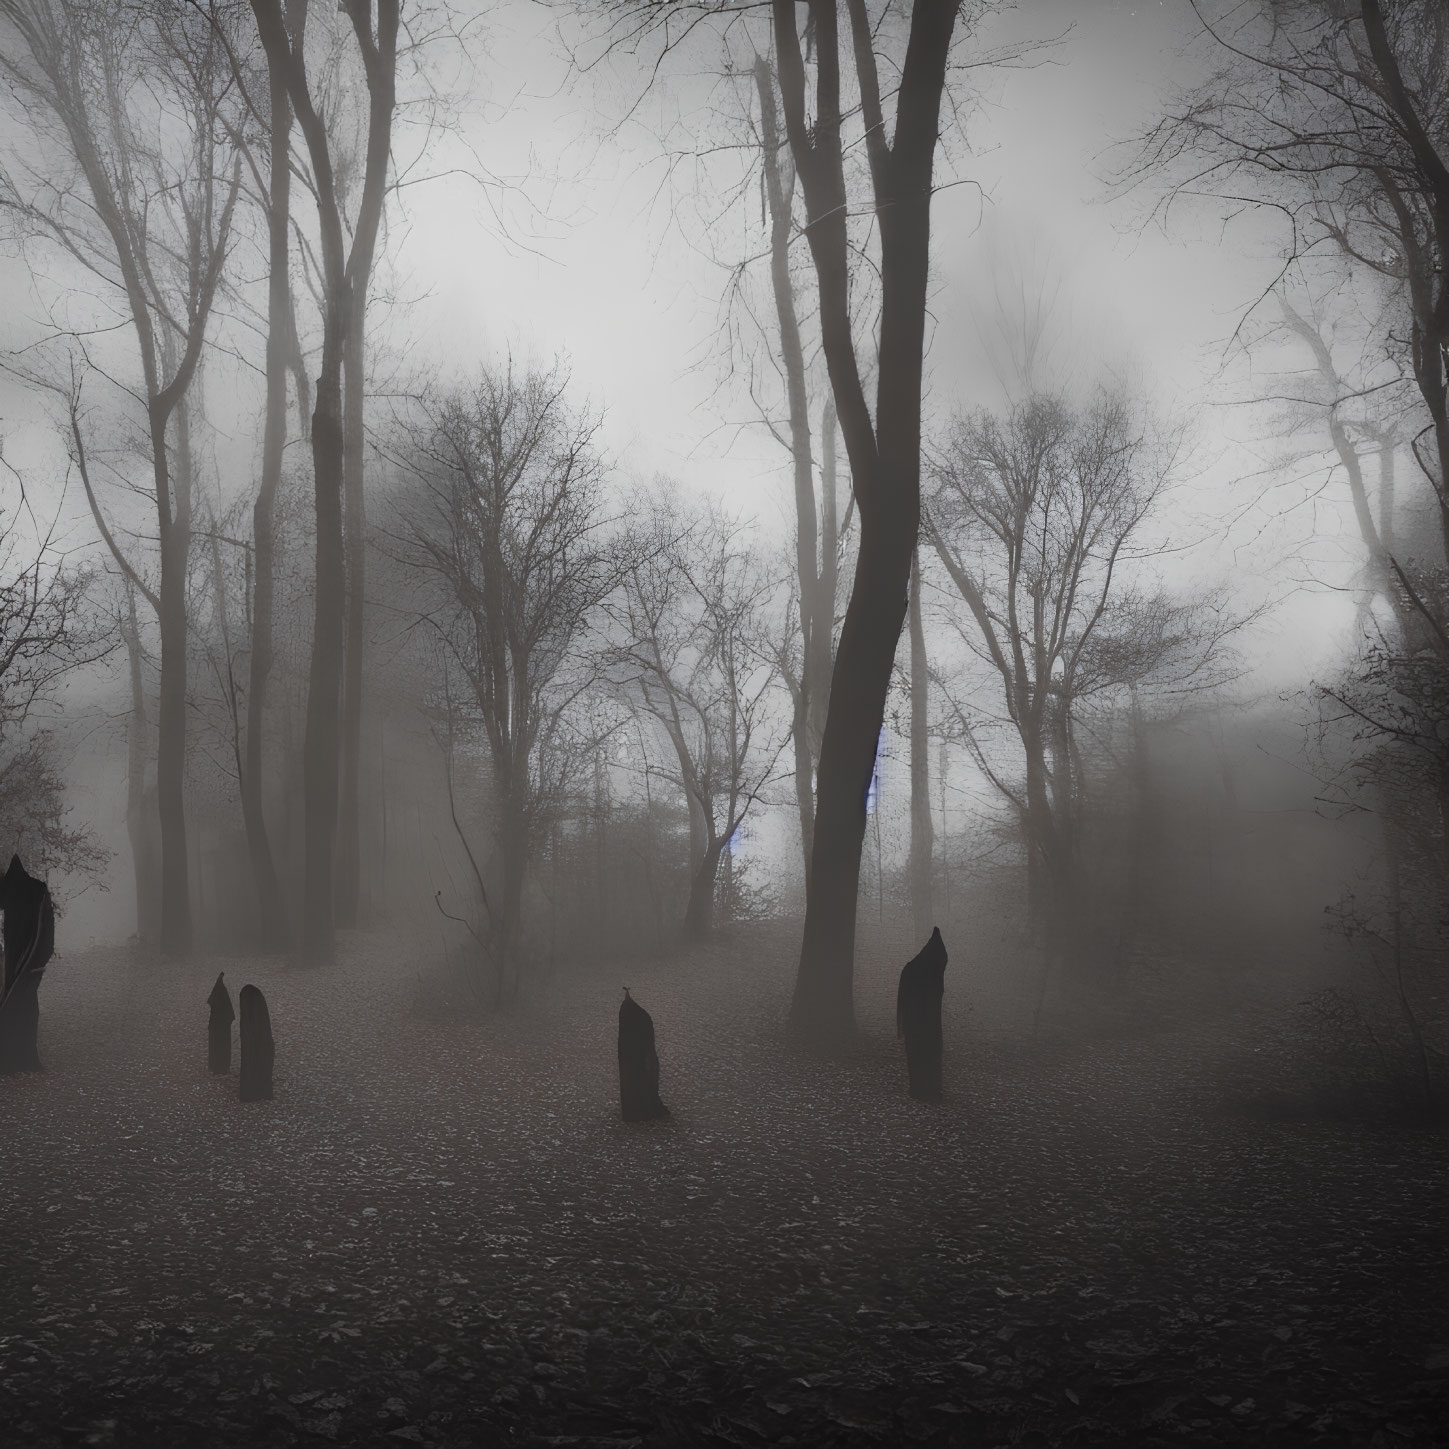 Misty forest with bare trees and mysterious figures in foggy setting